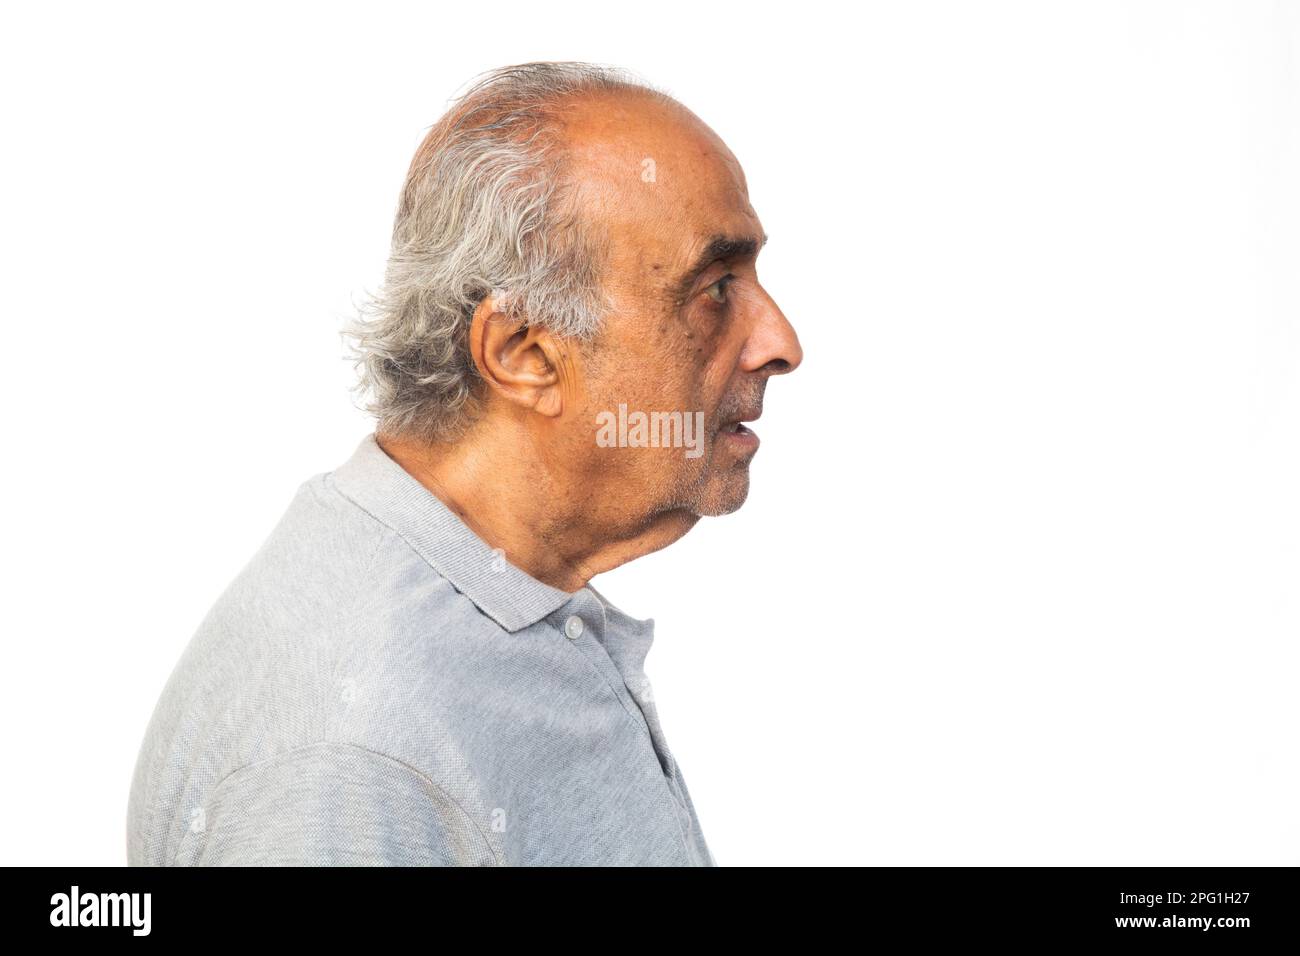 Profile of old man against white background Stock Photo